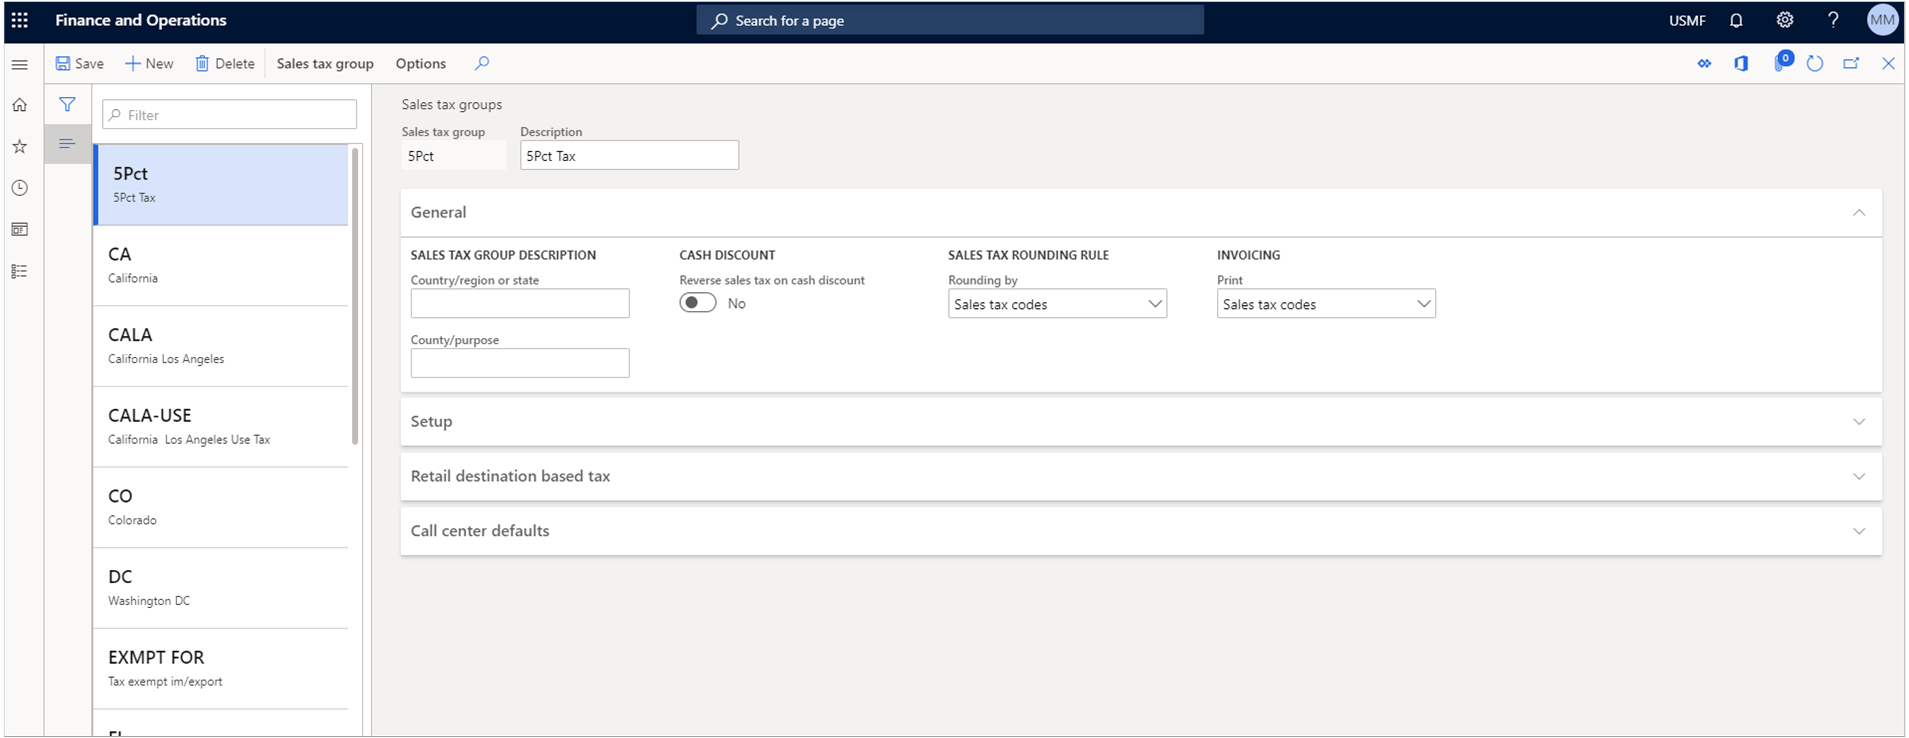 Screenshot depicts the Sales Tax Groups view. For each sales tax group you can set parameters in the Genera, Setup, Retail destination based tax, and Call center defaults tab. Under the General tab, you can set the country, region or state, the purpose, reverse sales tax on cash discounts, the rounding rule, and what to print when invoicing. In our case, rounding is done by sales tax codes. The Print option is also set to Sales tax codes.